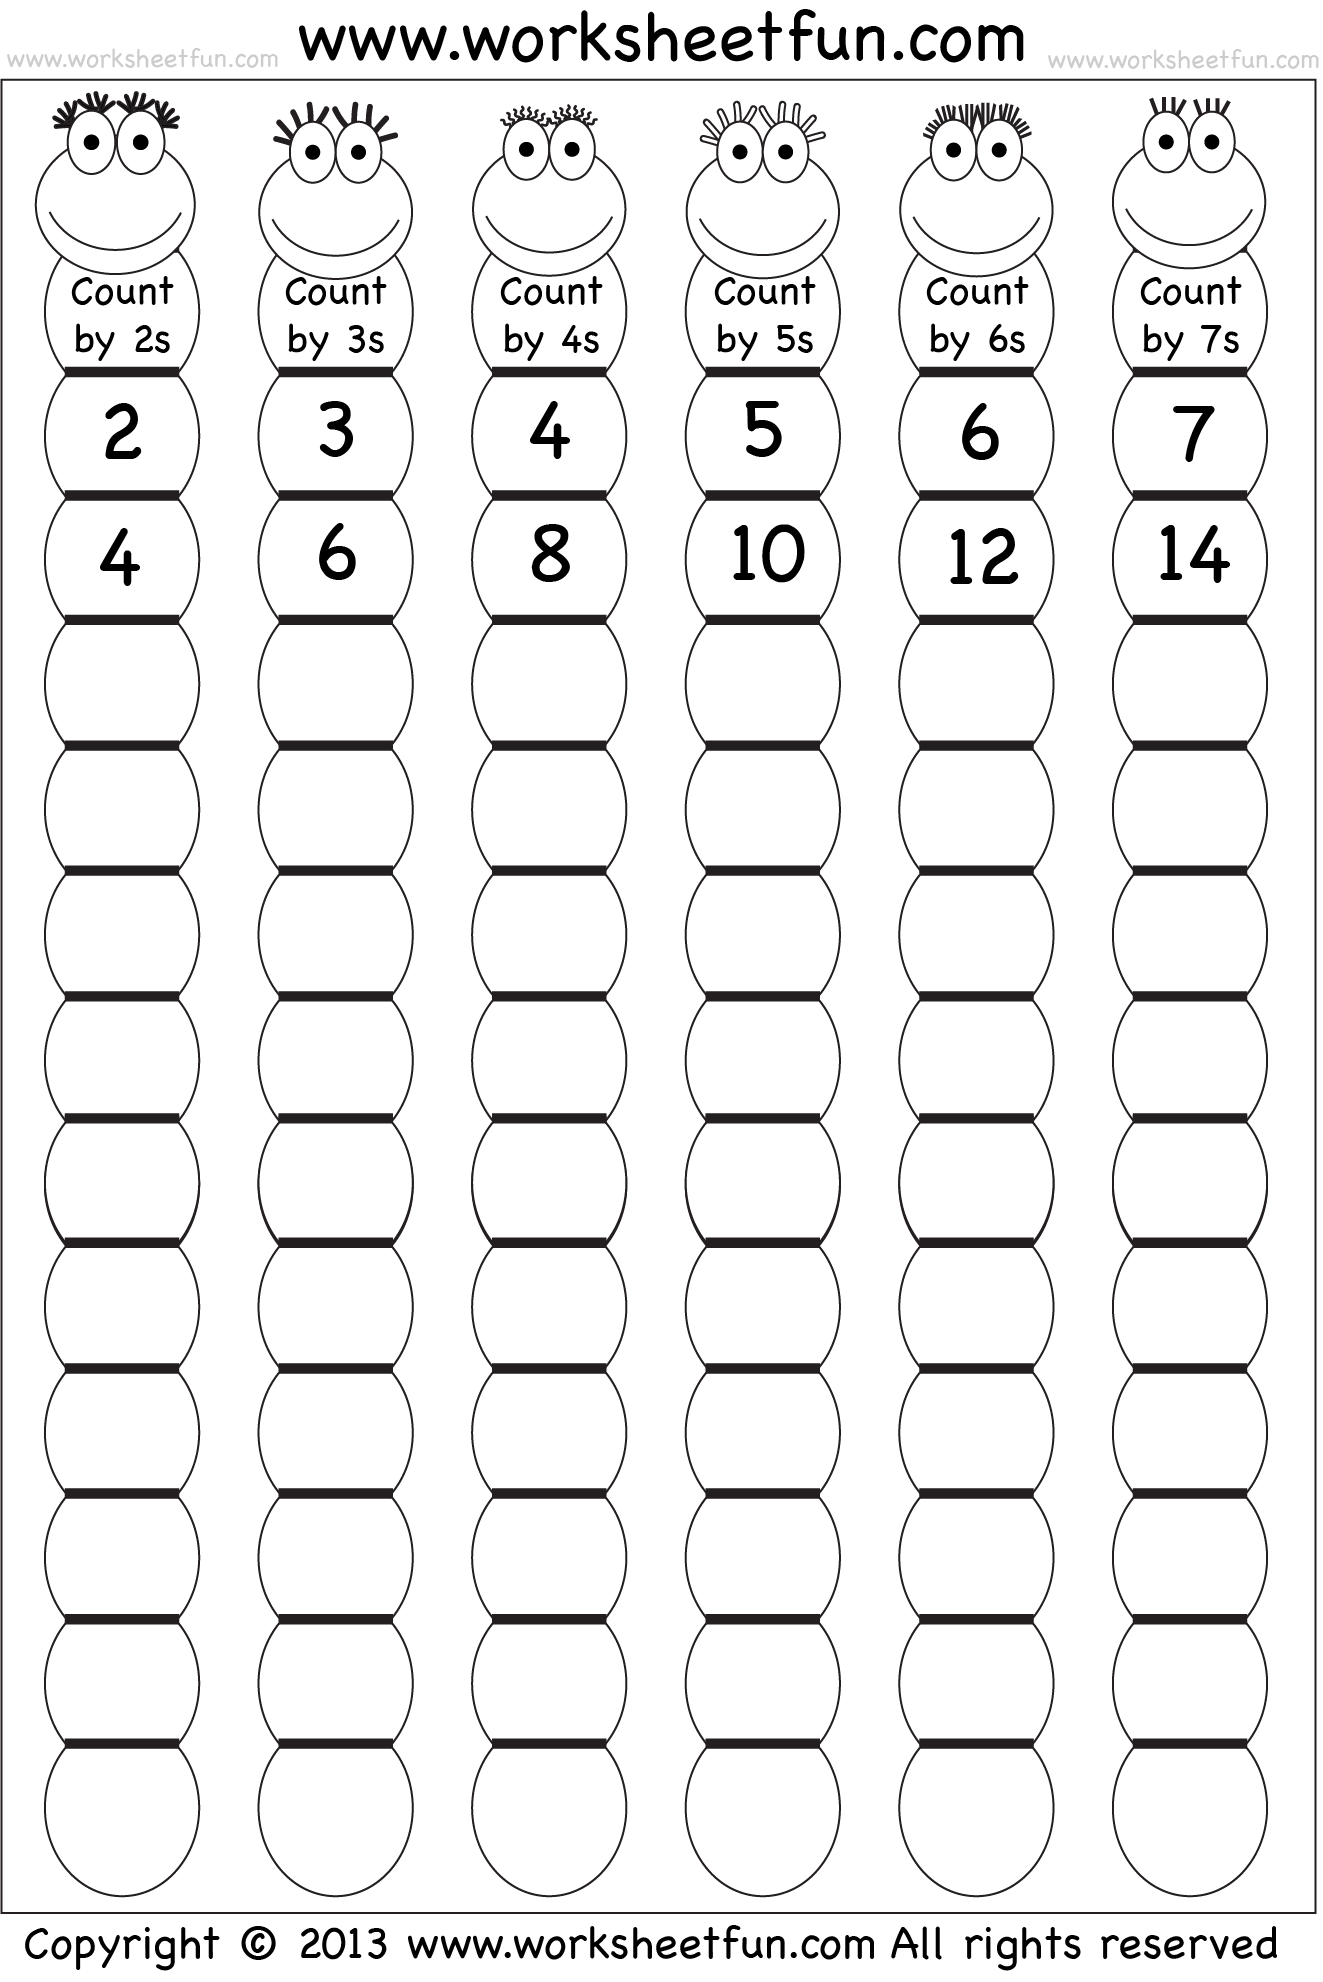 Skip Counting by 2, 3, 4, 5, 6 and 7 – Worksheet / FREE Printable